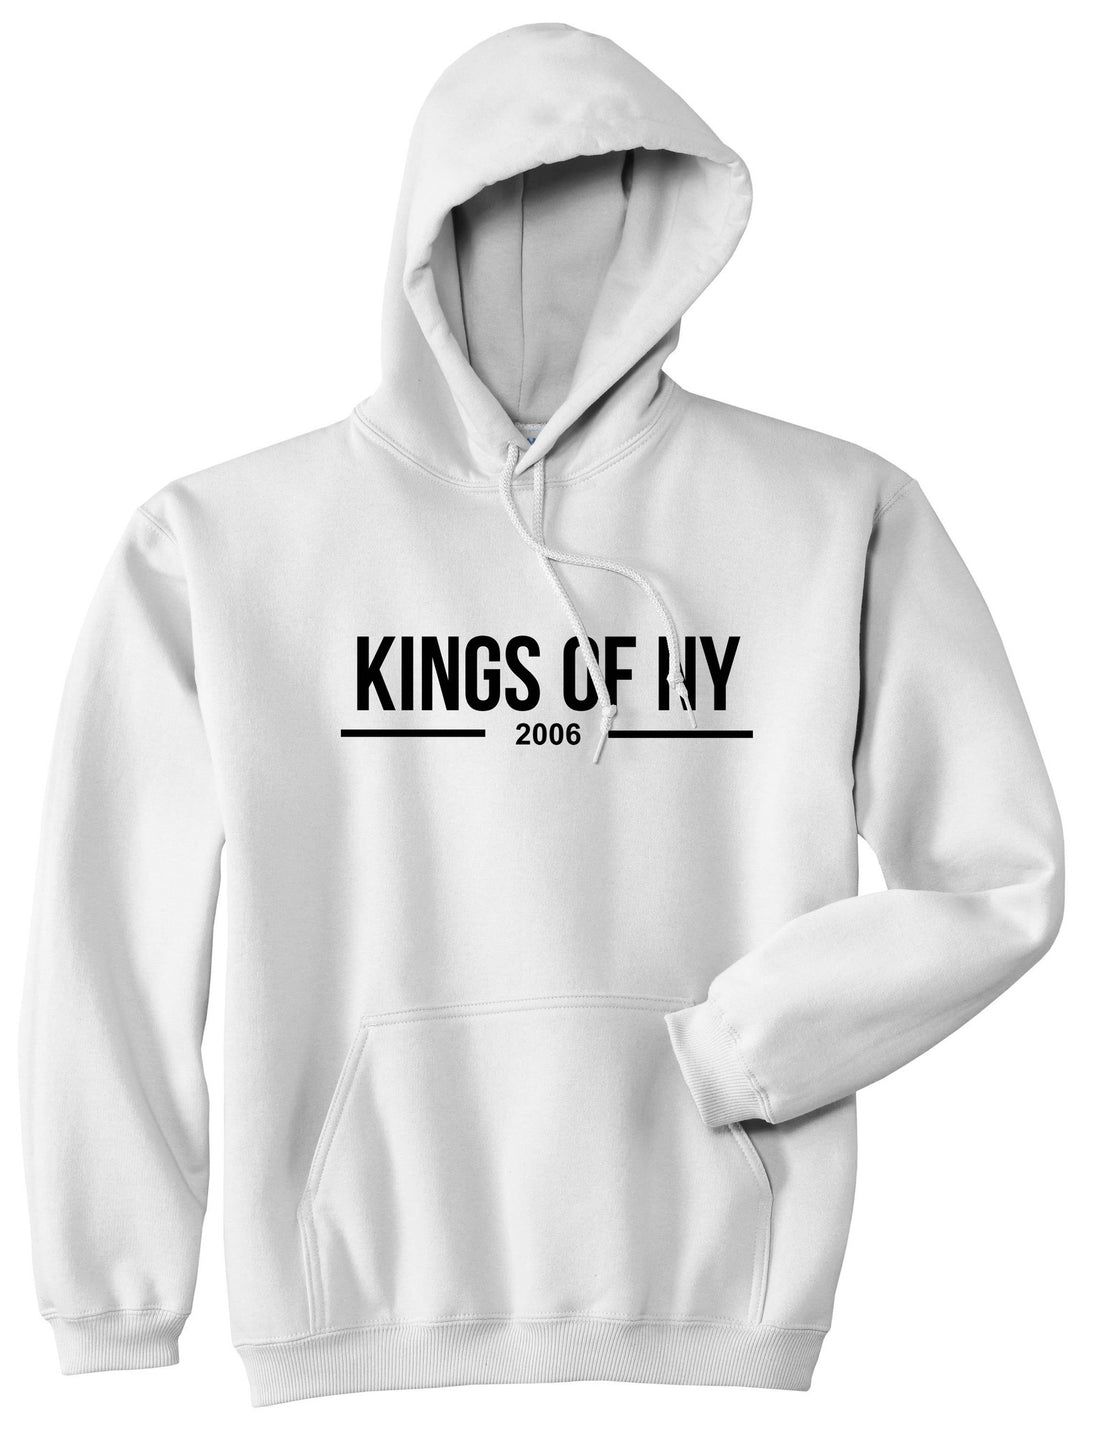 Kings Of NY 2006 Logo Lines Boys Kids Pullover Hoodie Hoody in White By Kings Of NY